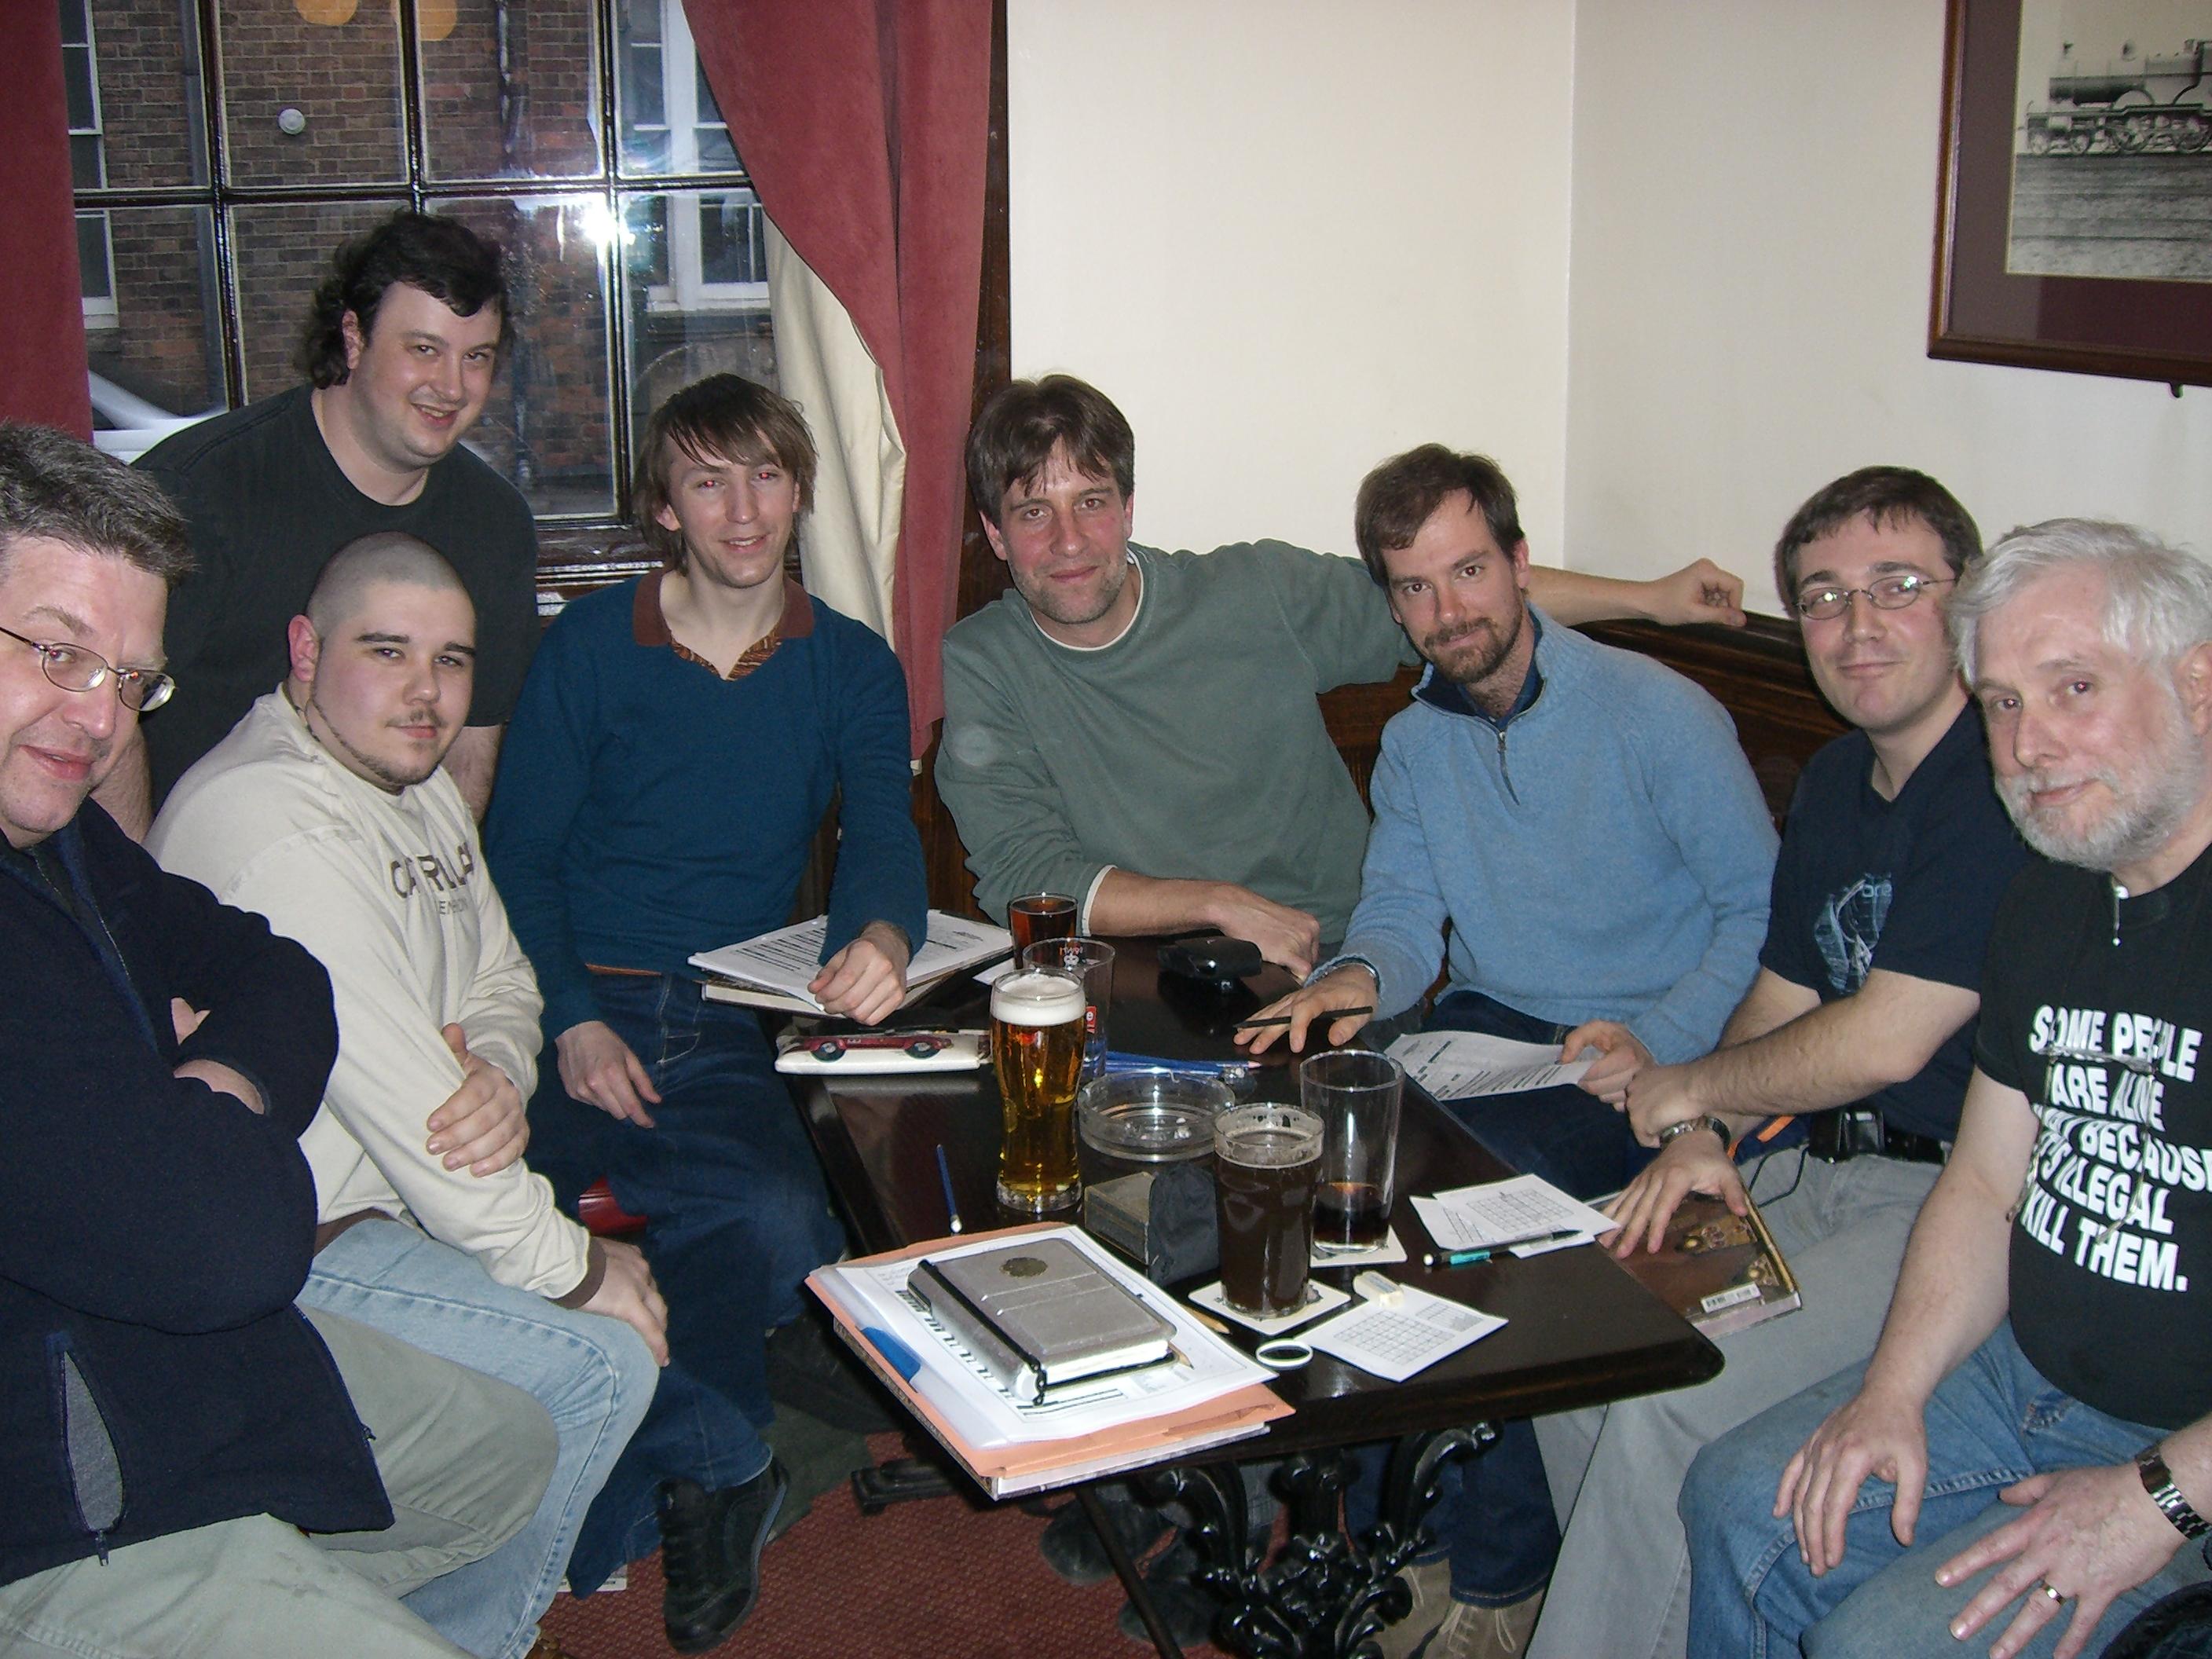 Our first ever meeting. At the Brunswick 11 March 2006